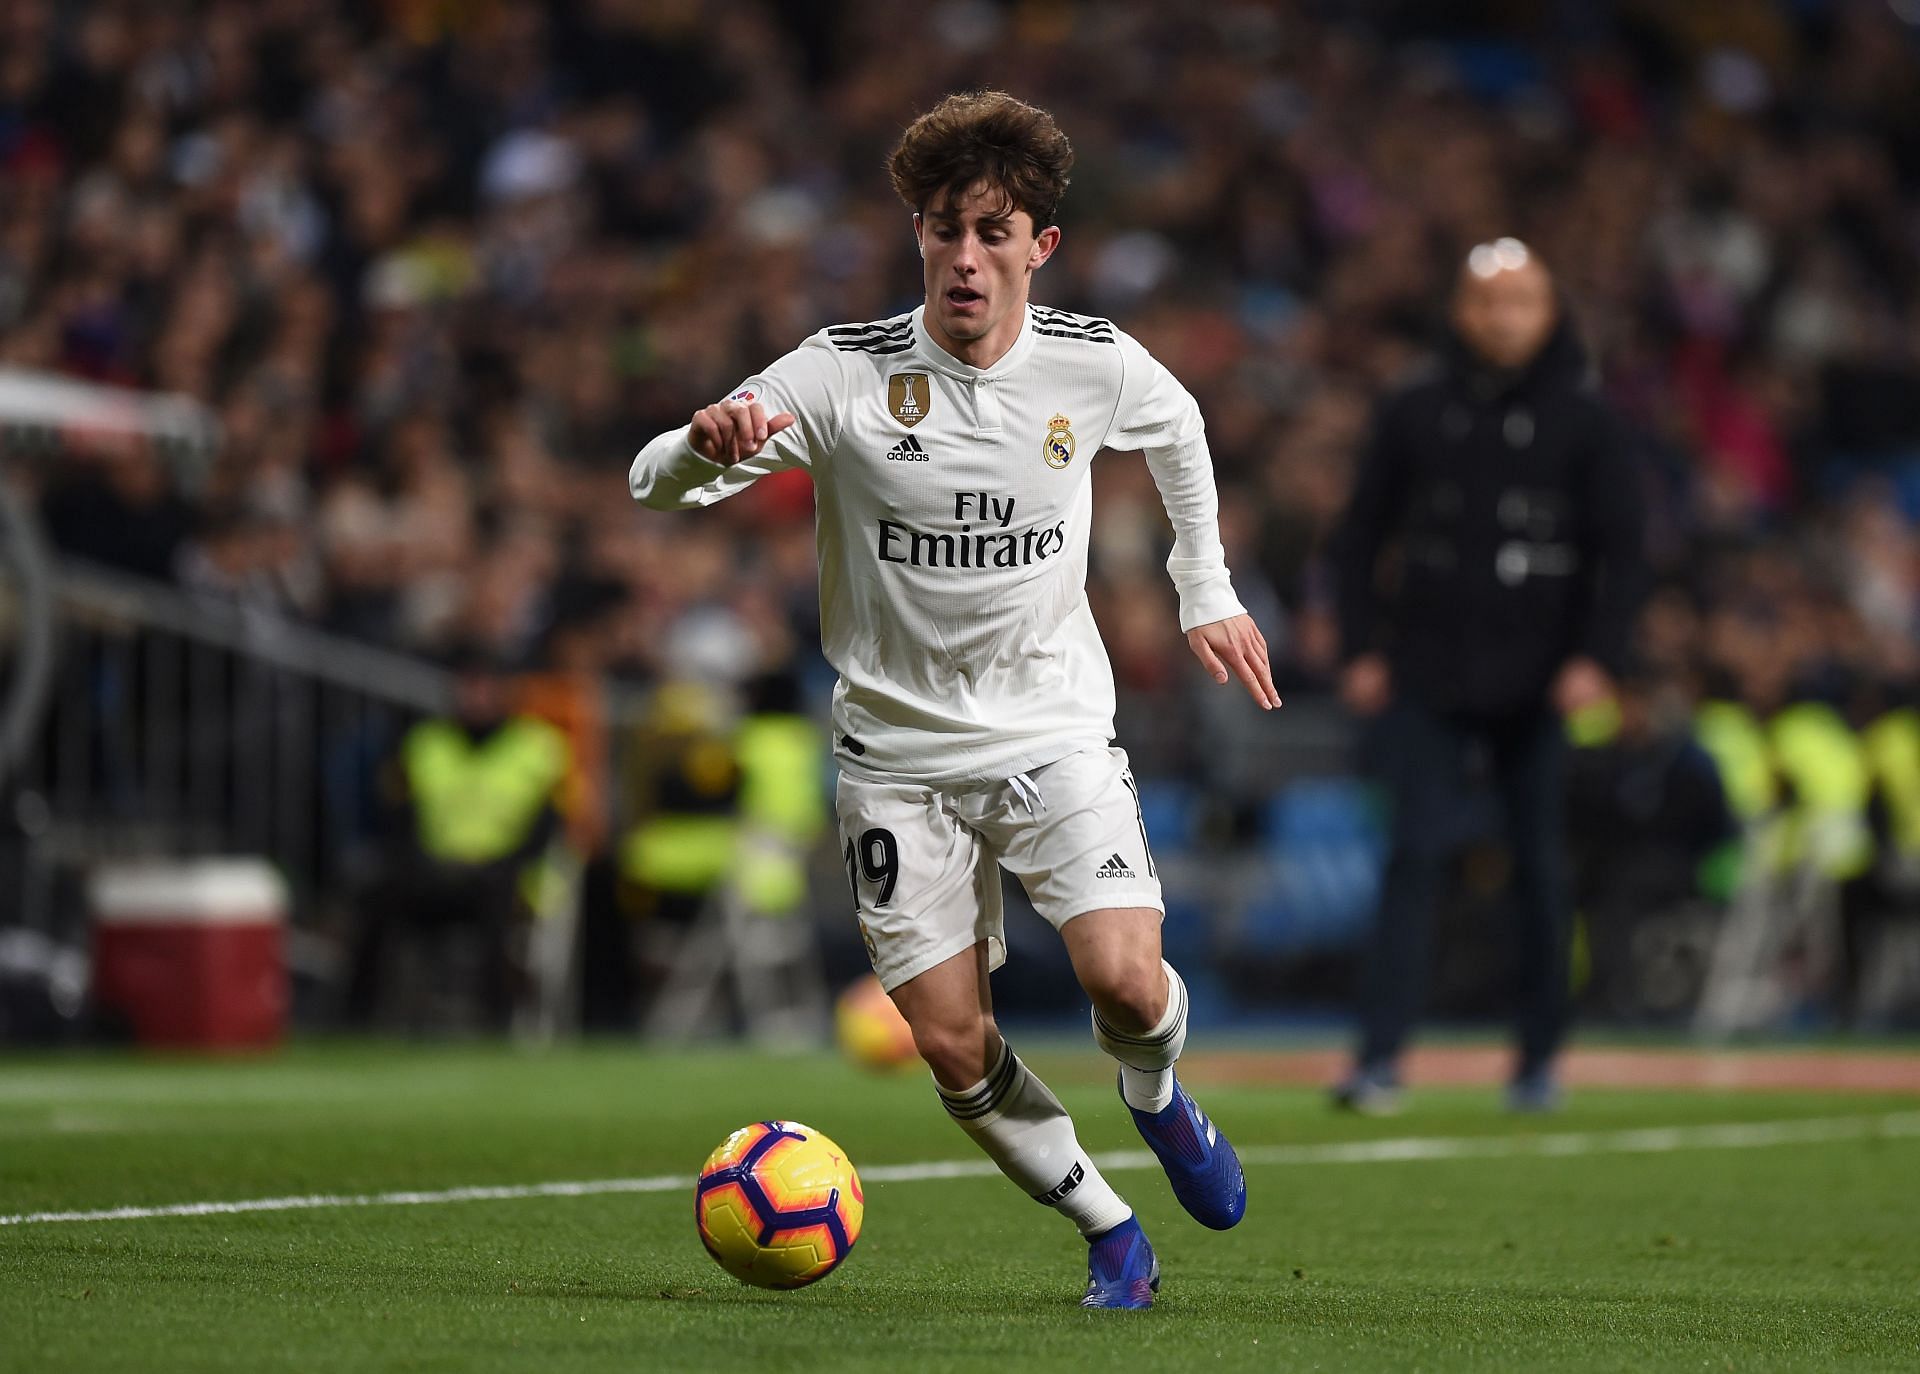 Alvaro Odriozola in action for Real Madrid against Deportivo Alaves in February 2019.